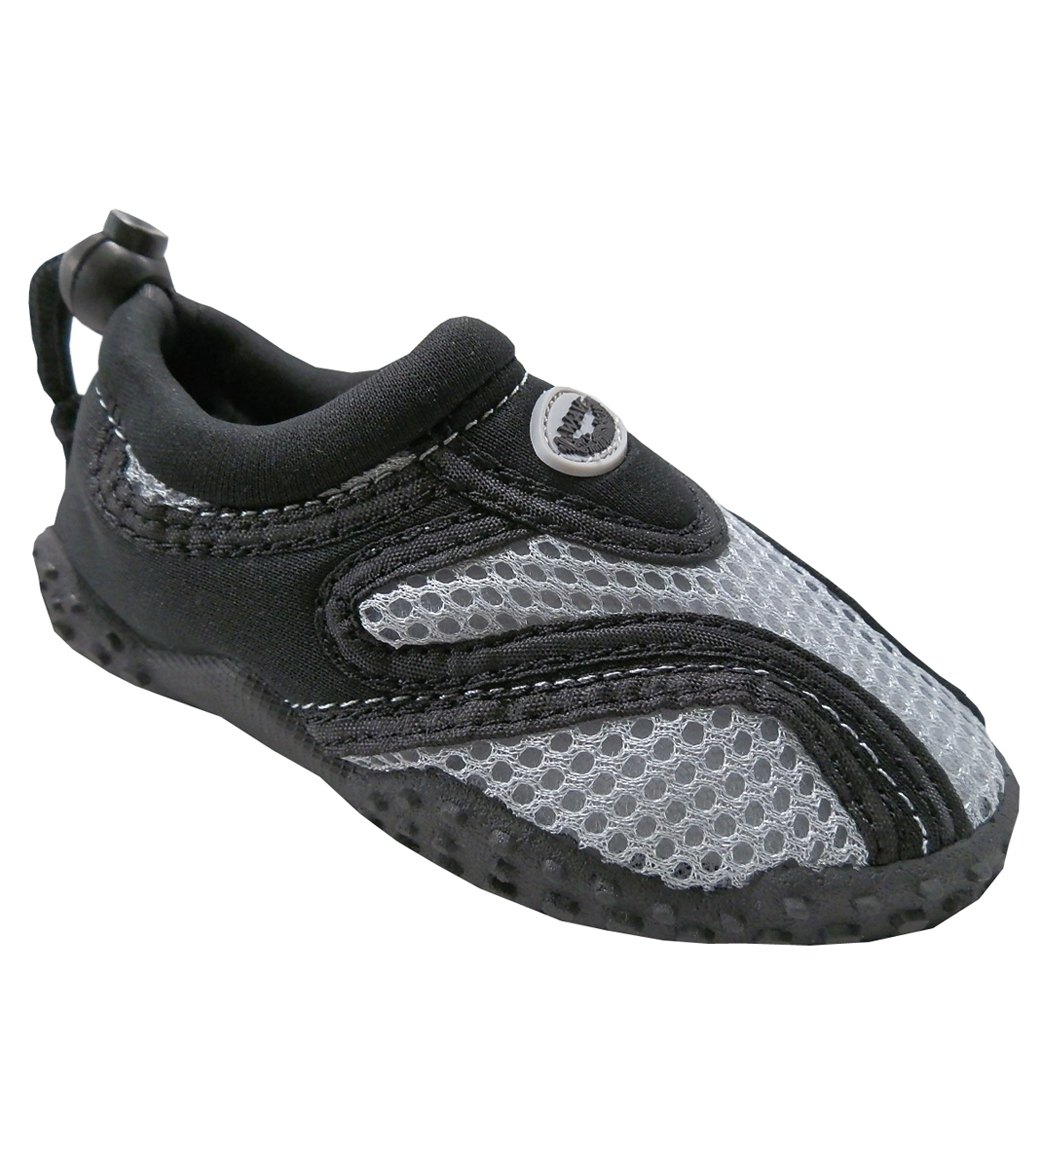 Easy Usa Kids' Water Shoes - Black/Grey 1 - Swimoutlet.com